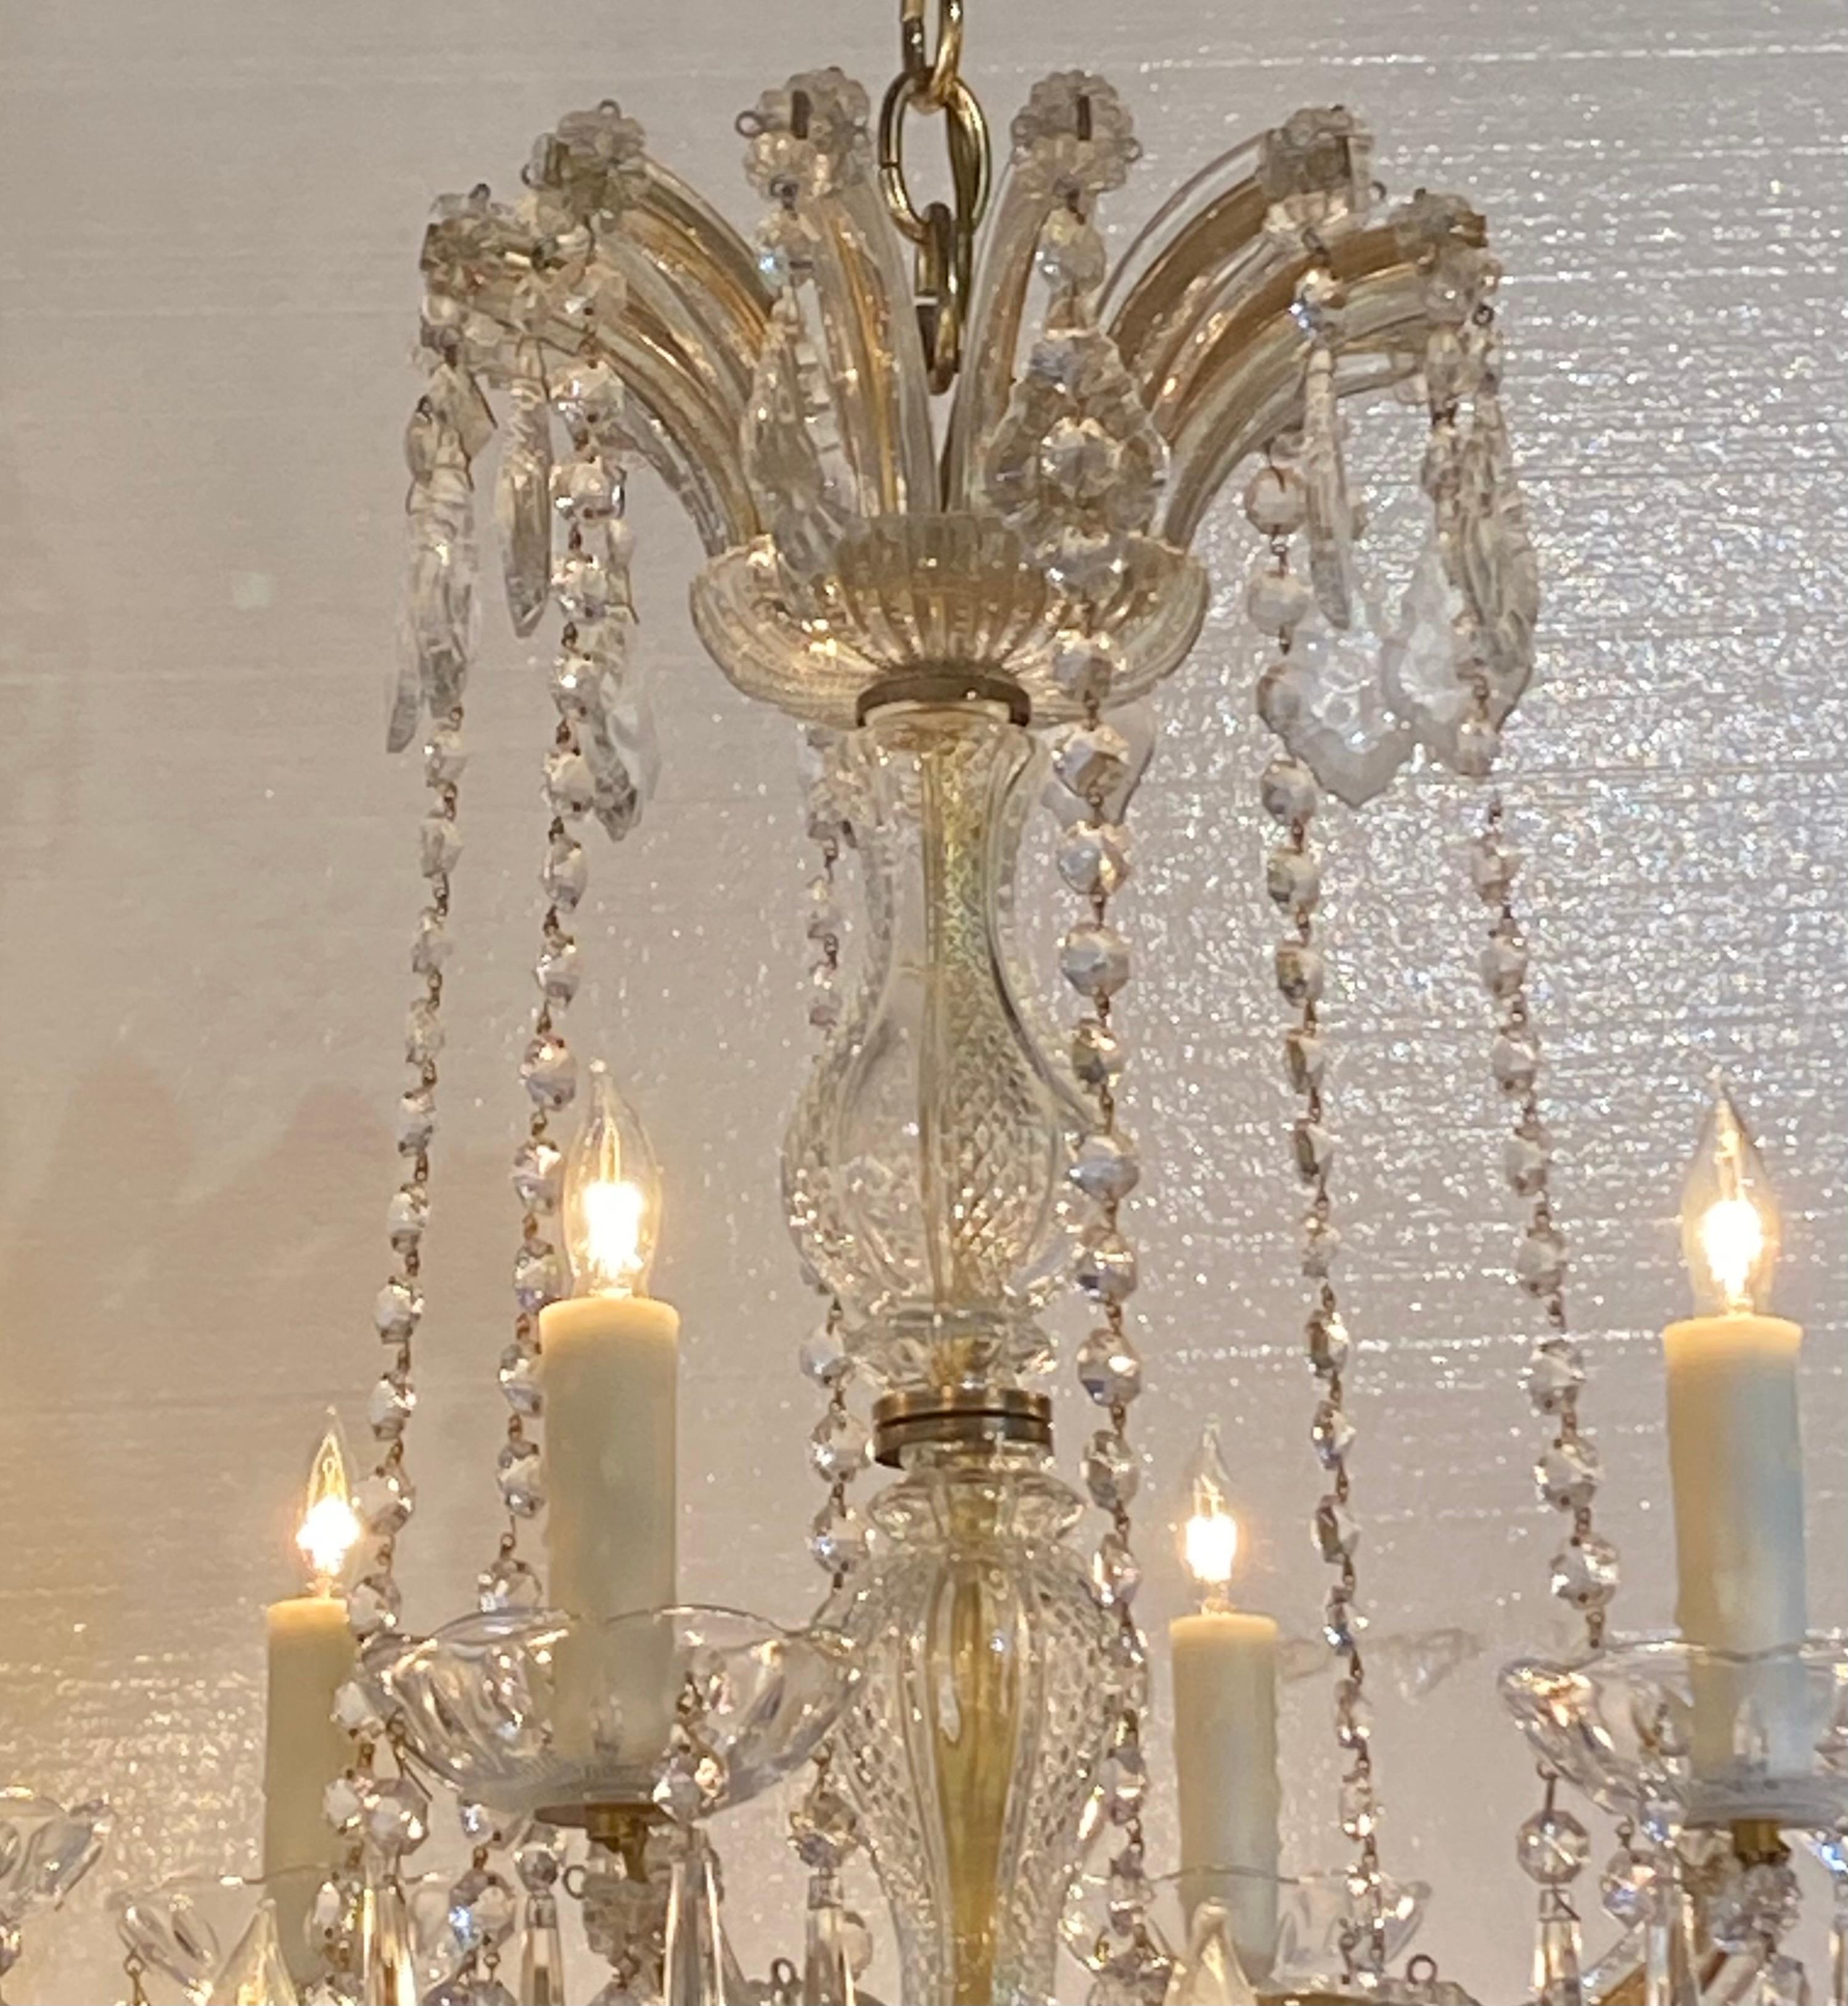 19th century Maria Teresa crystal chandelier, 18 lights with 18 - 4